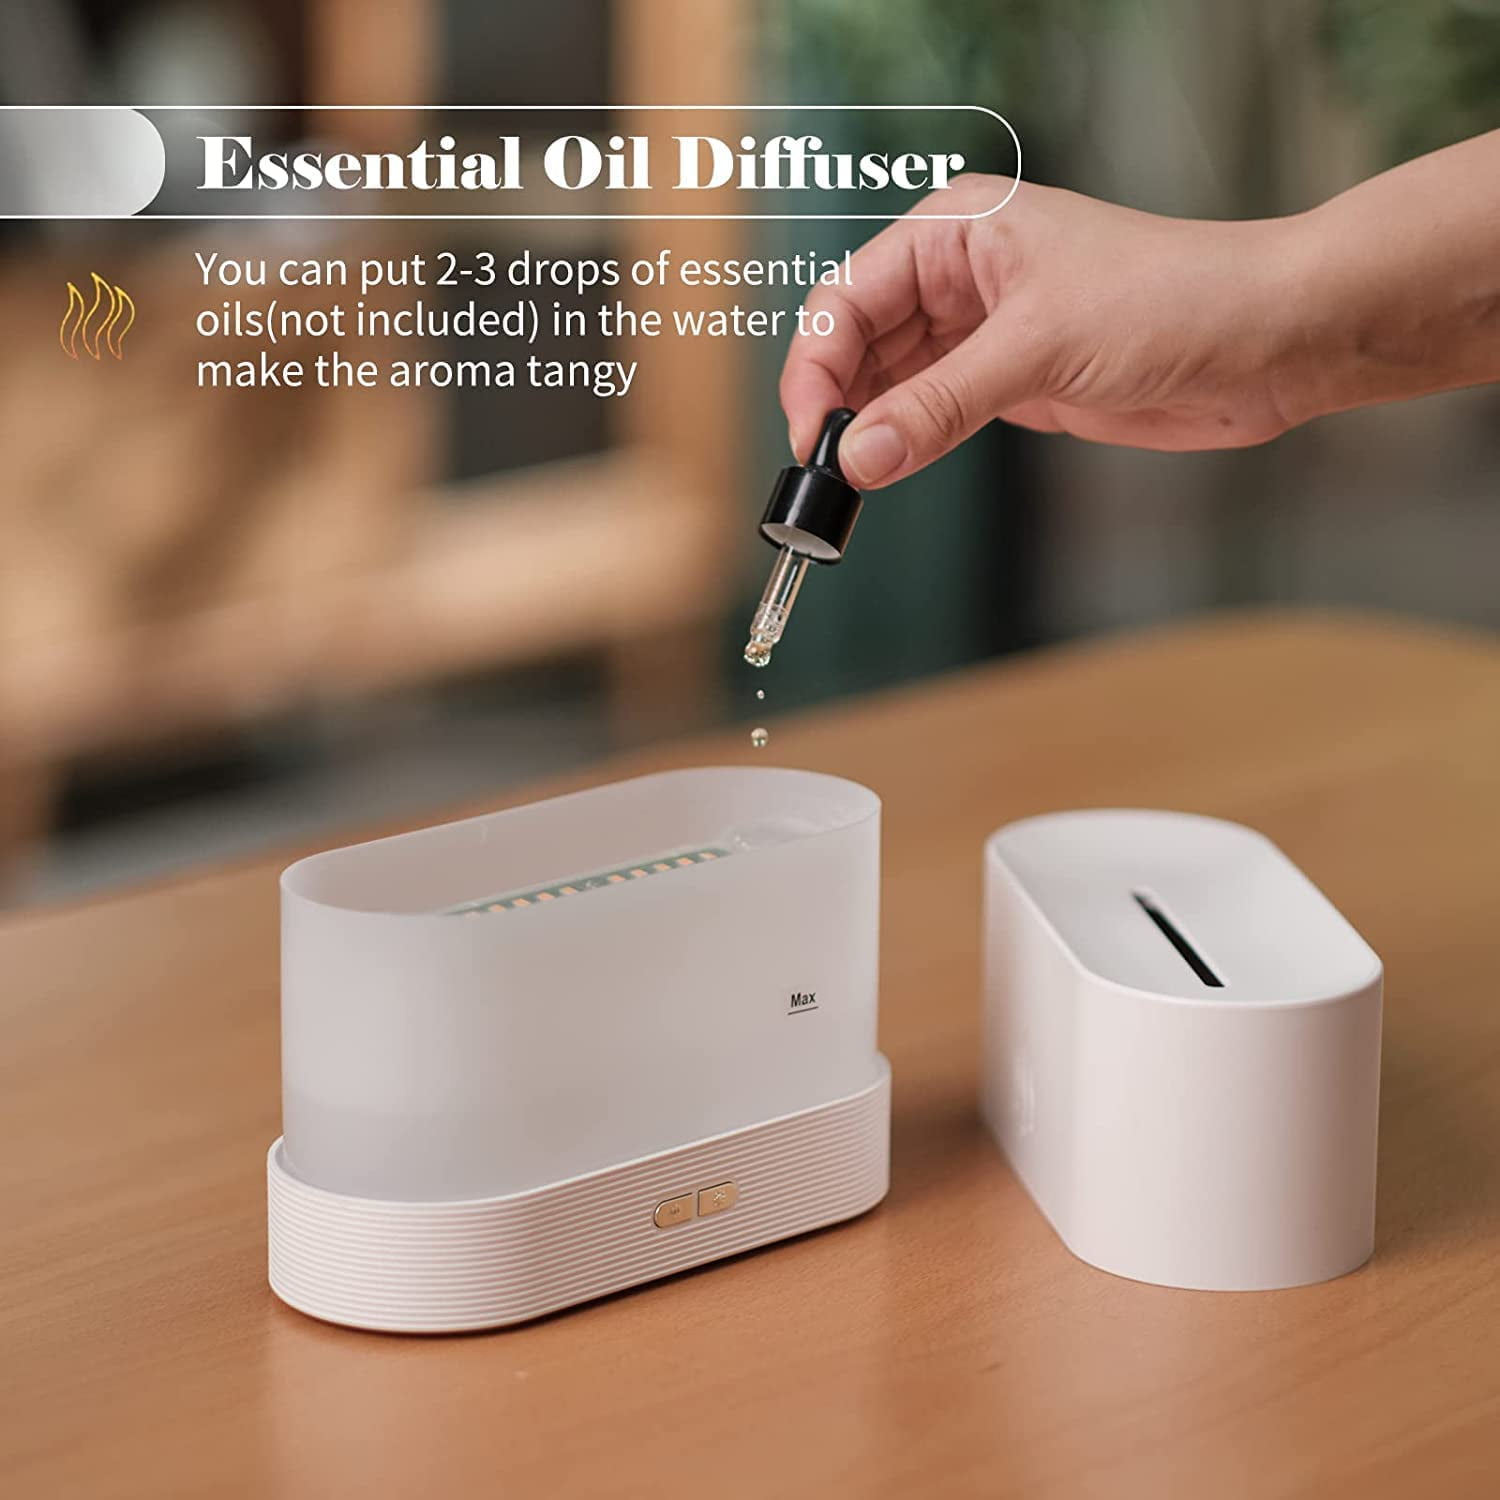 Flame Air Diffuser,Humidifier,Portable-Noiseless Aroma Diffuser for Home, Office or Yoga Essential Oil Diffuser with No-Water Auto-Off Protection 